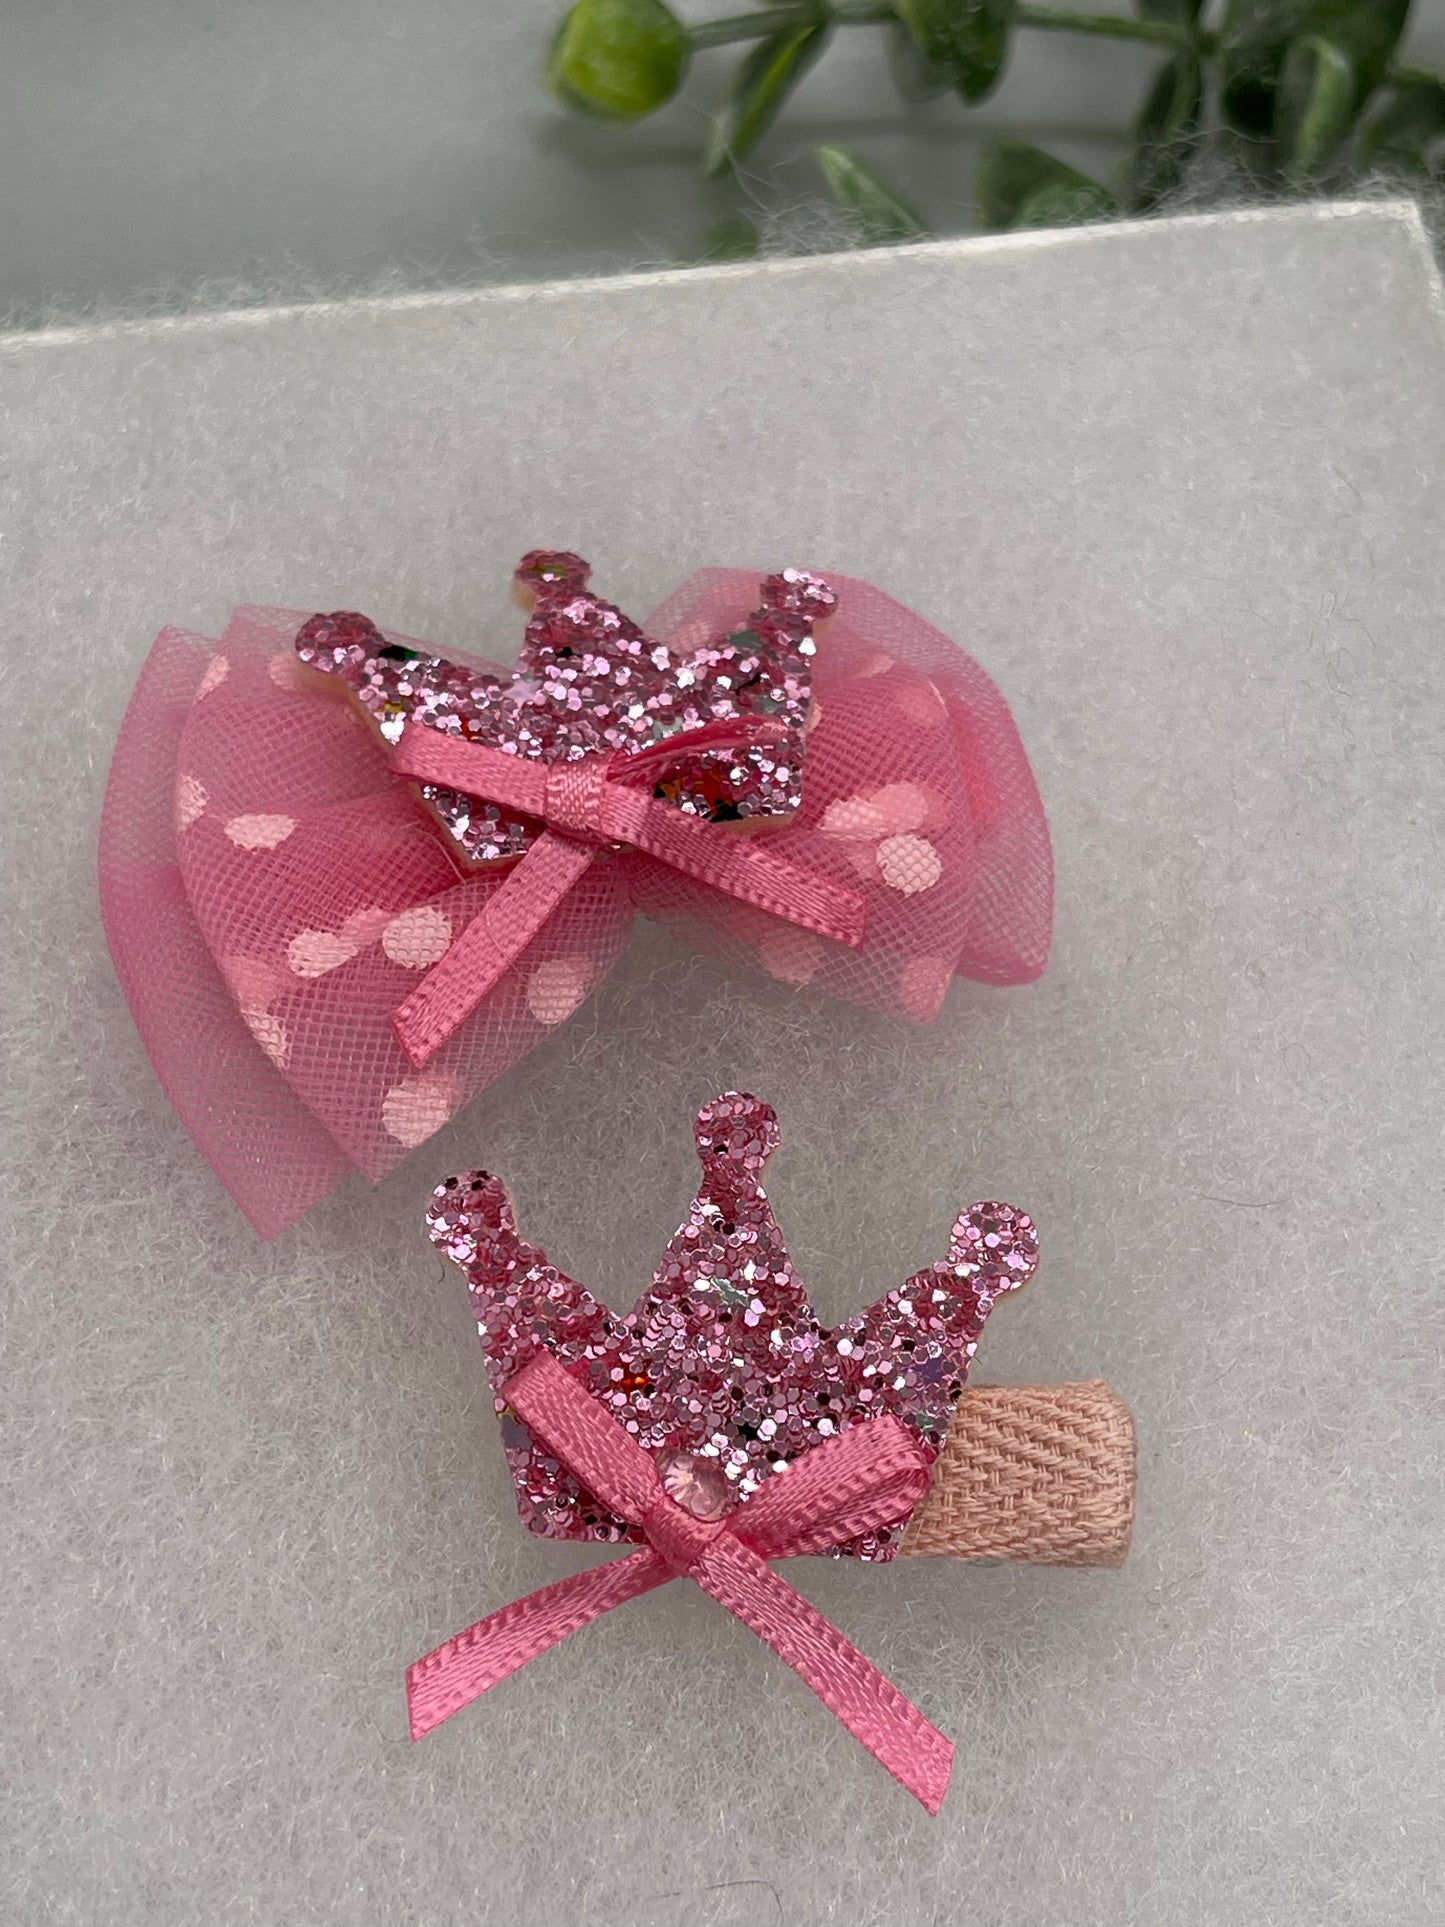 Pink Bow crown Girls hair clips 2 pc set pink 1.0” 1.5” alligator clips girls little girls hair accessory accessories jewelry